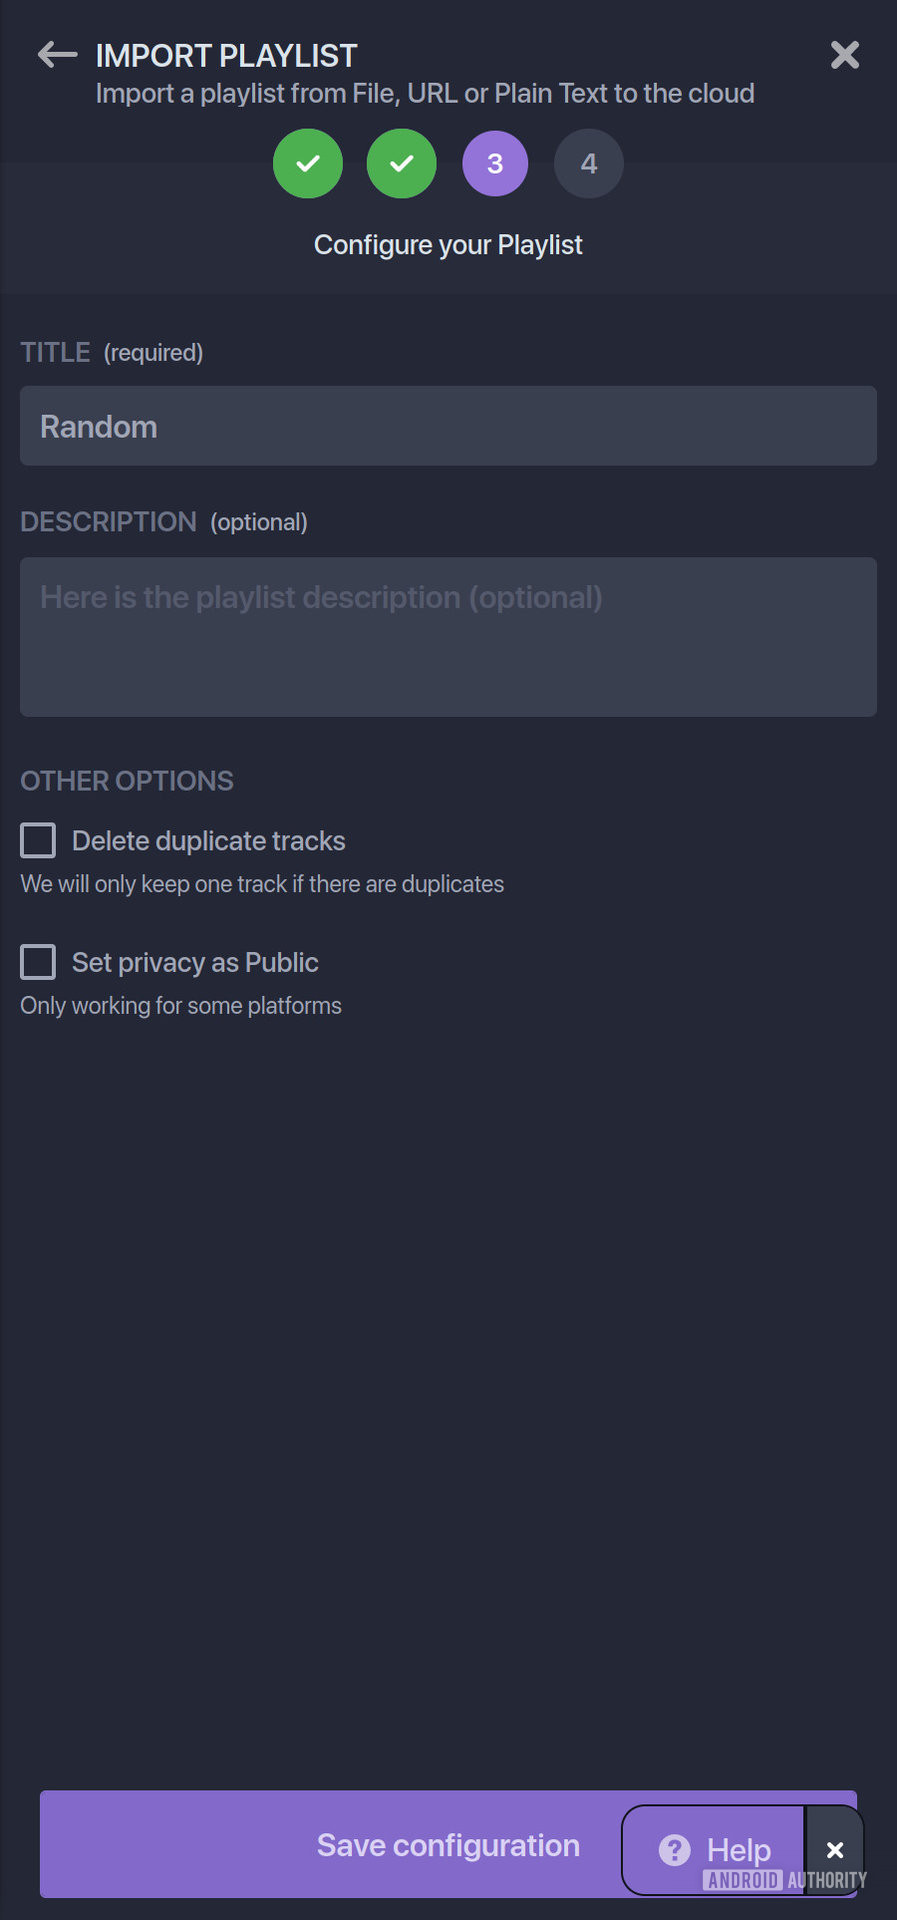 A screenshot of Soundiiz being used to transfer songs from Amazon Music to Apple Music.